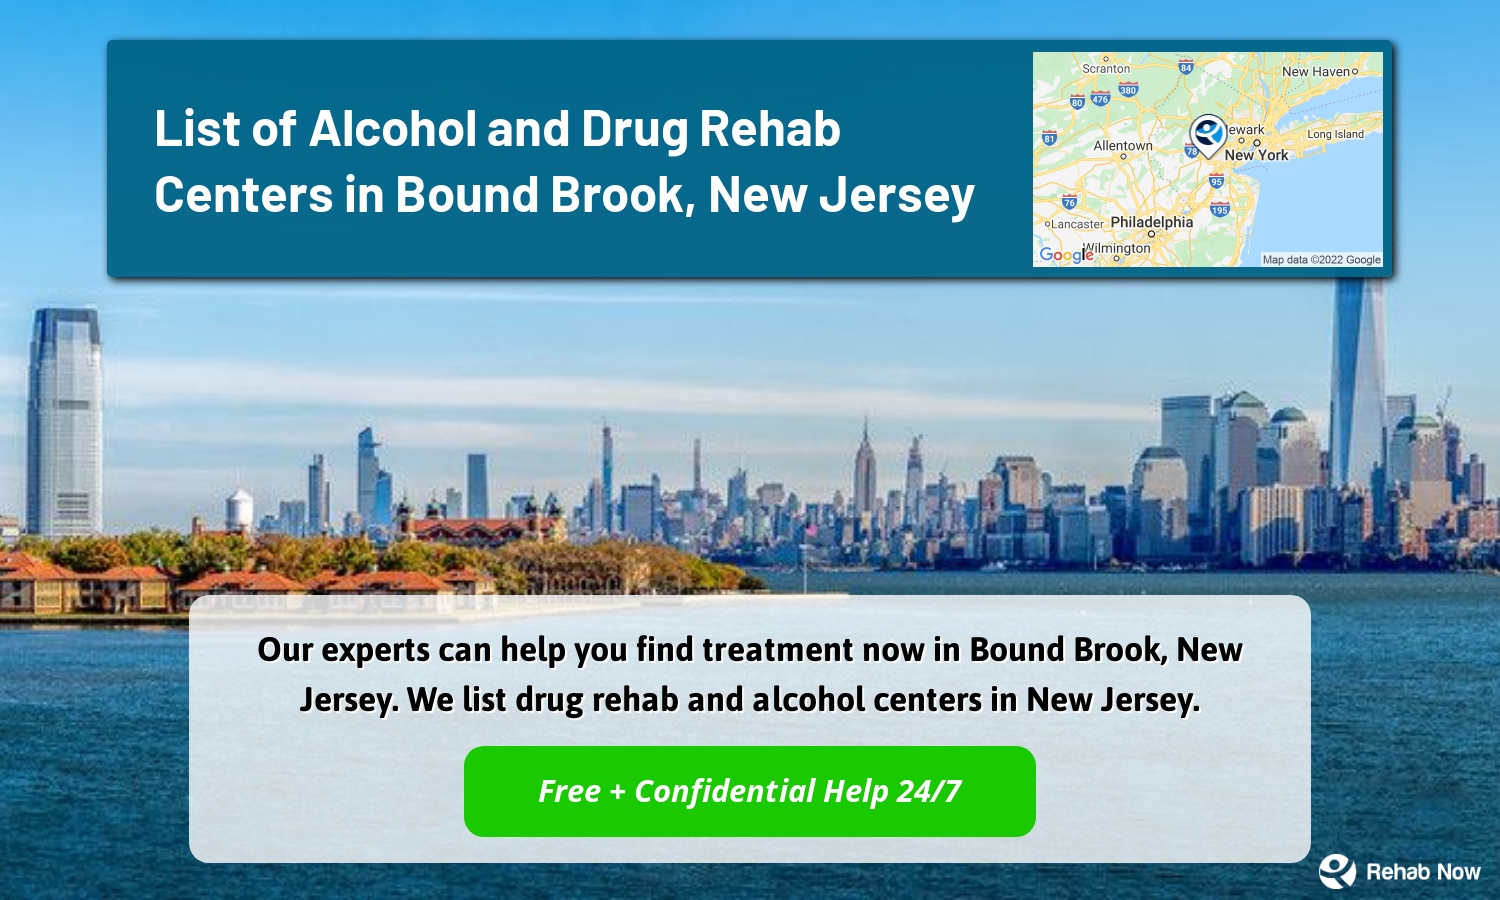 Our experts can help you find treatment now in Bound Brook, New Jersey. We list drug rehab and alcohol centers in New Jersey.